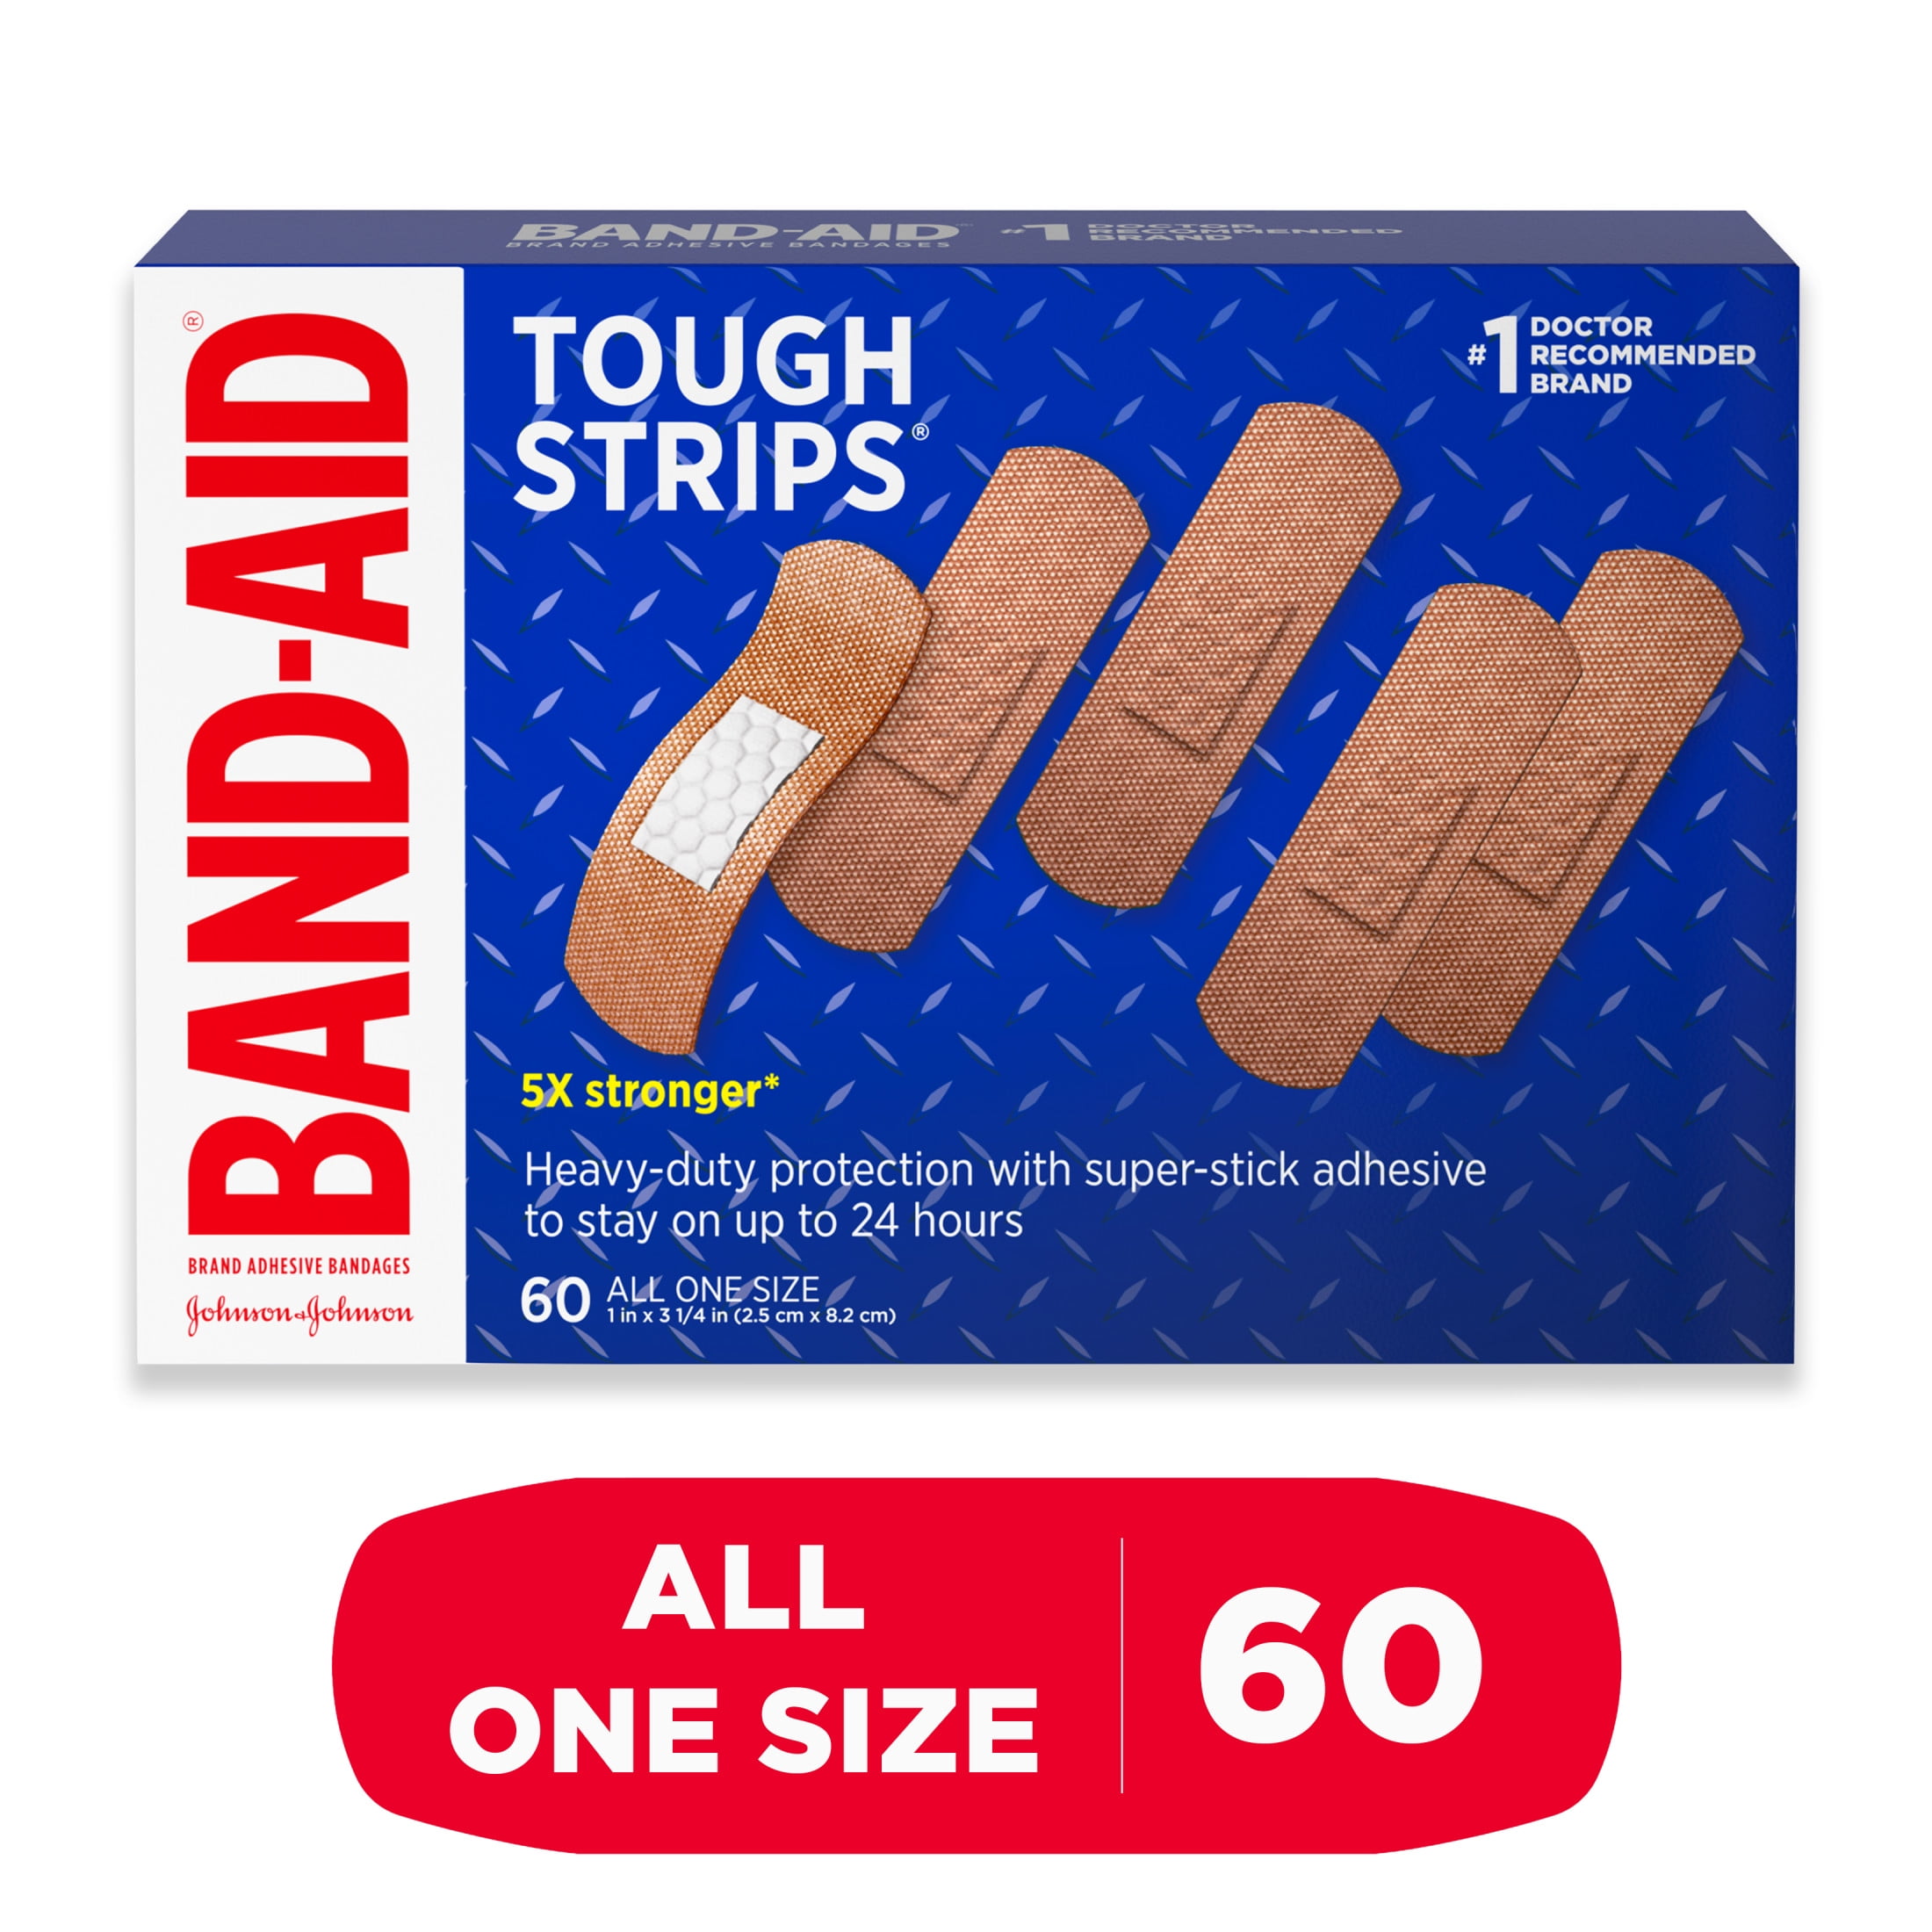 Band-Aid Tough Strips Bandages, Brand Adhesive, All One Size - 20 bandages